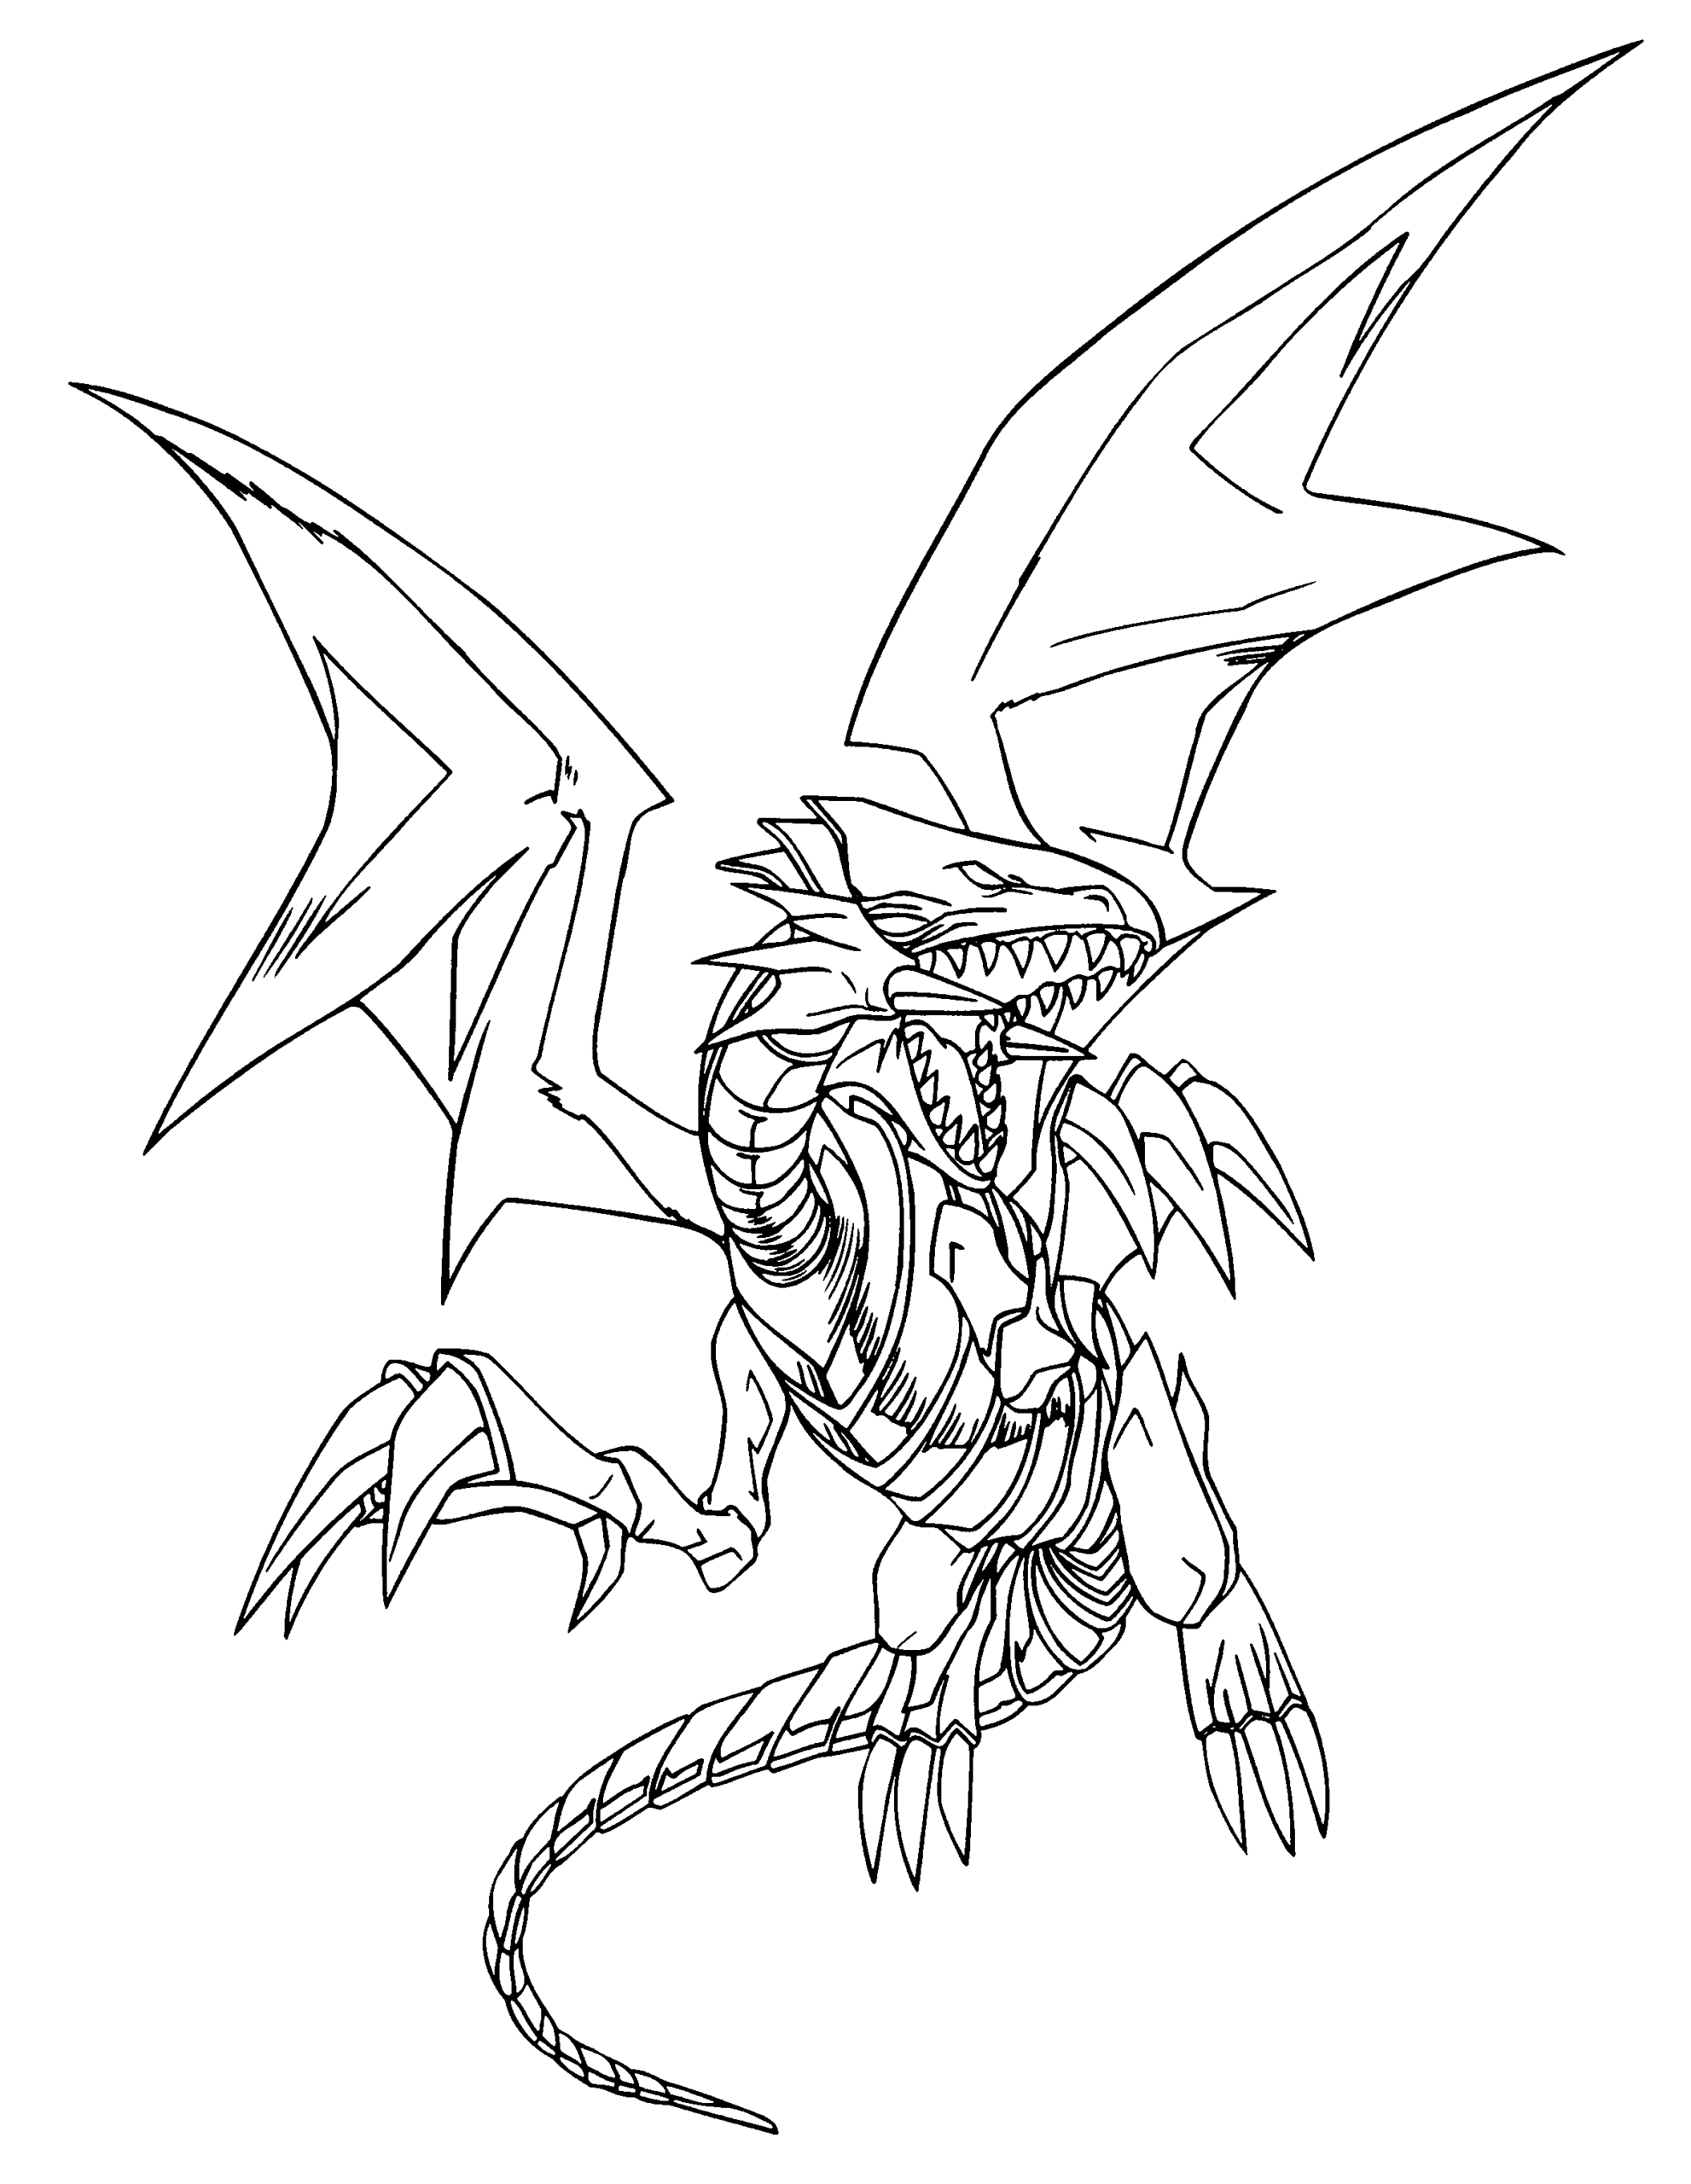 yugioh coloring pages cyber dragon